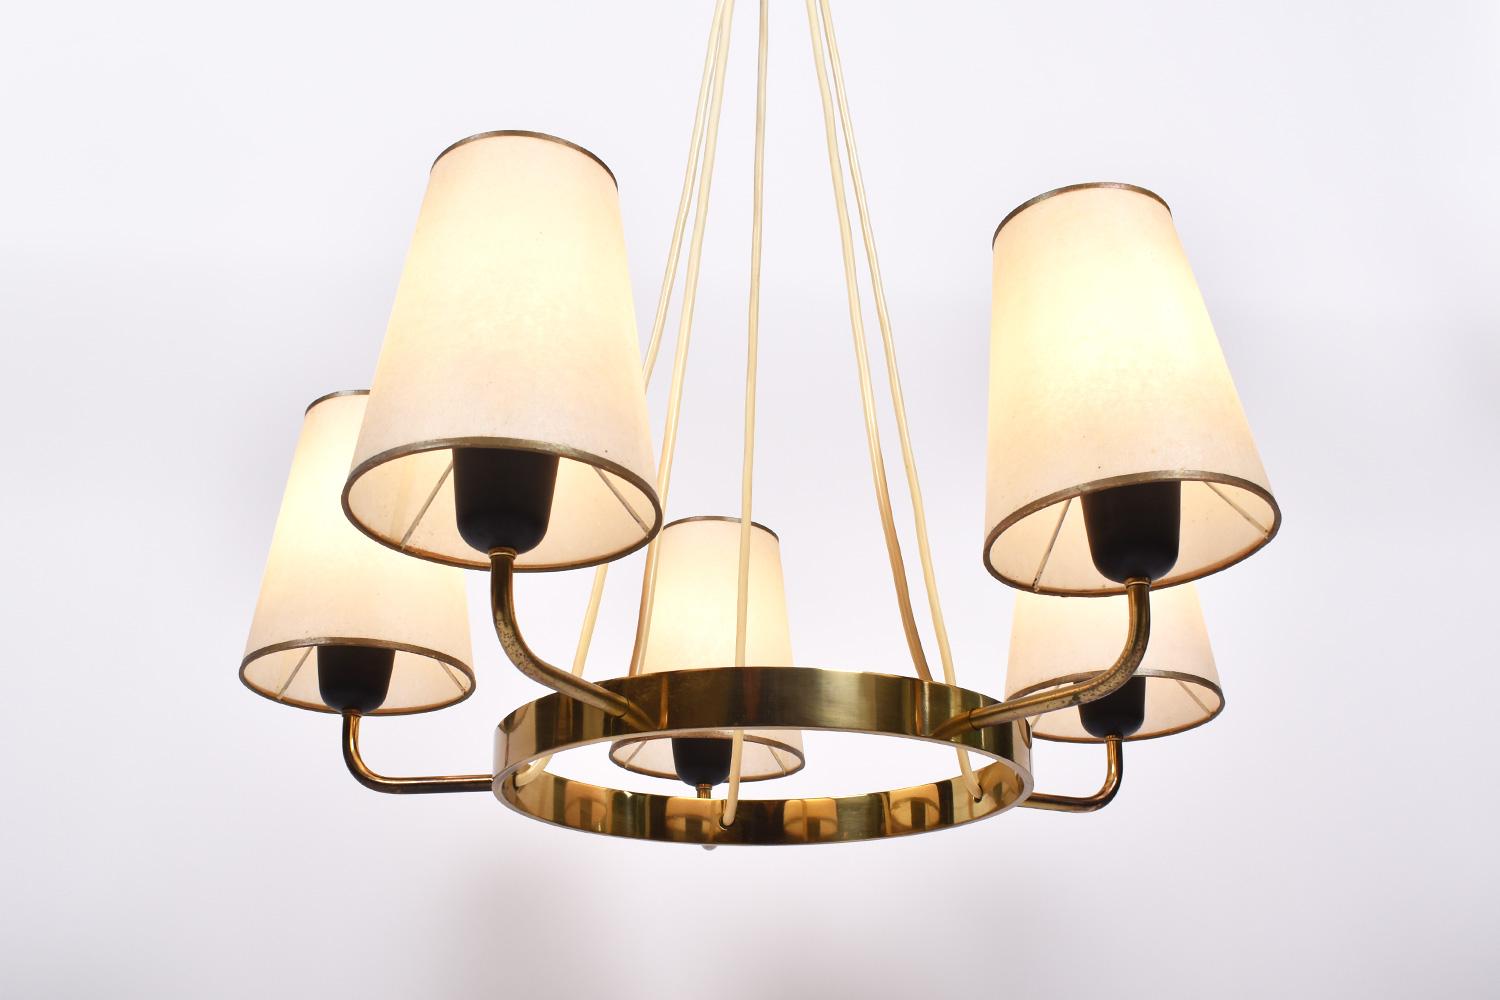 Polished Art Déco Brass Chandelier with Five Arms, 1950, Switzerland For Sale